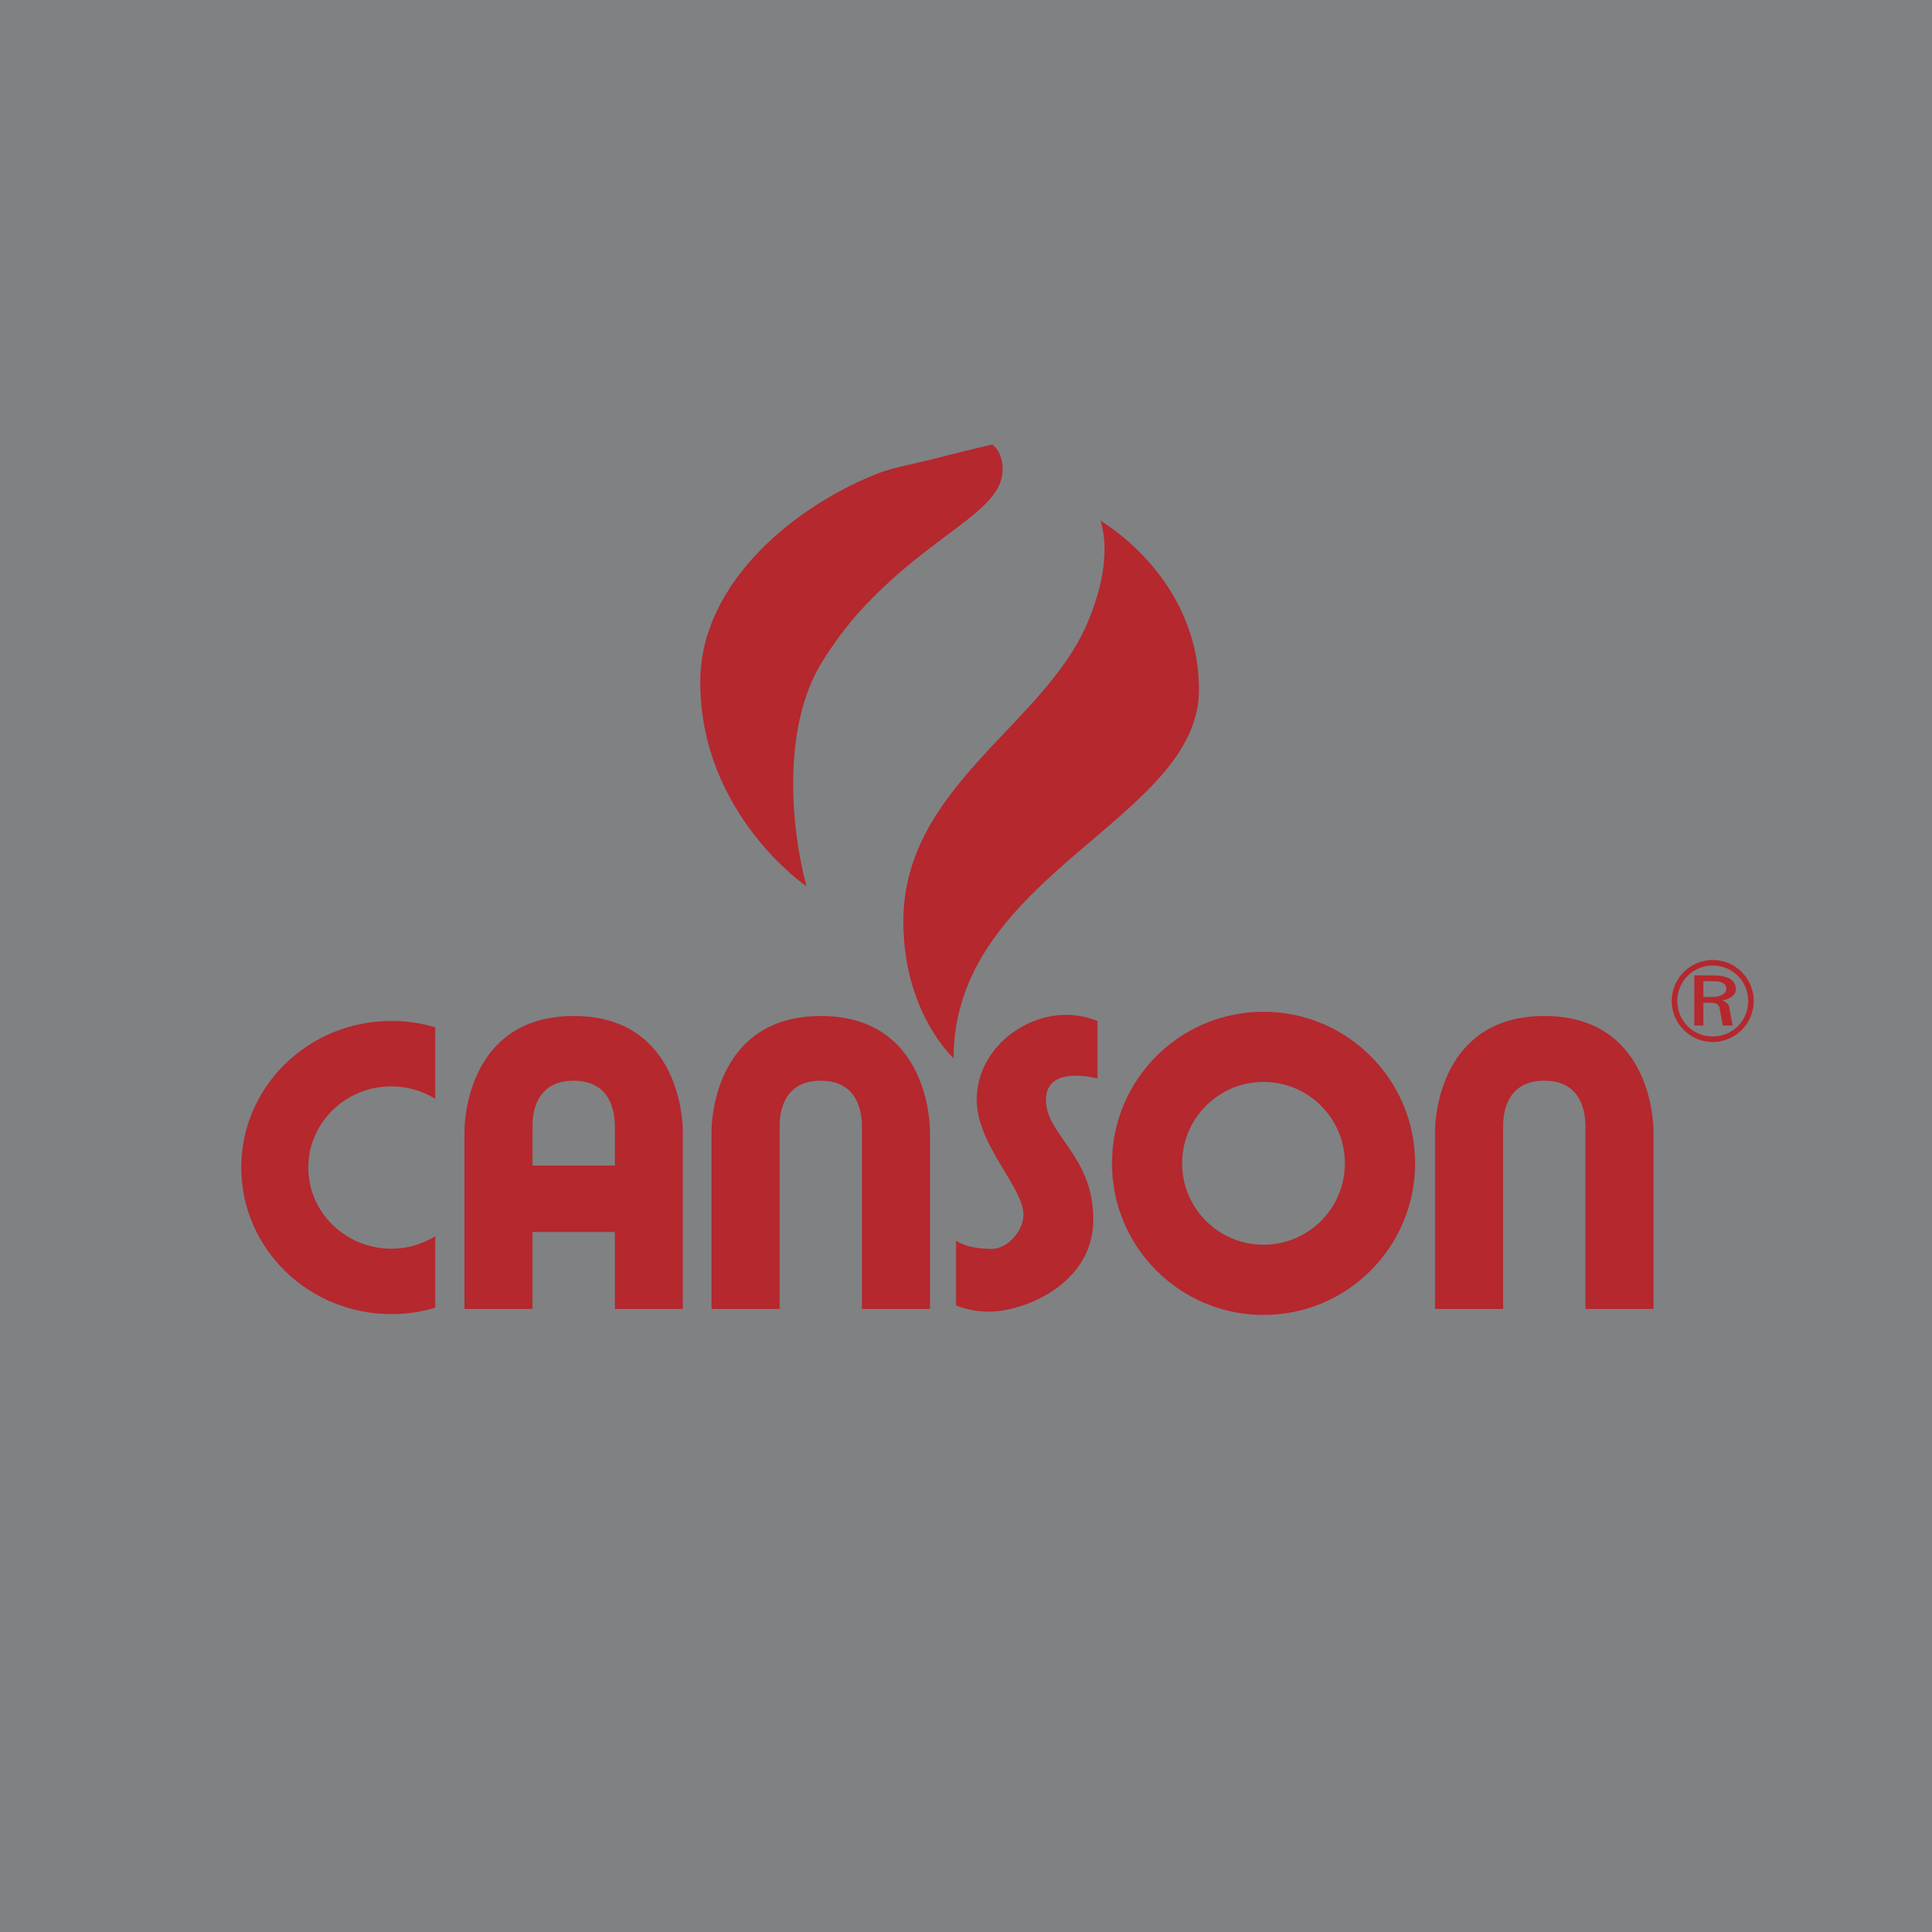 Canson Logo - Canson Logo PNG Transparent & SVG Vector